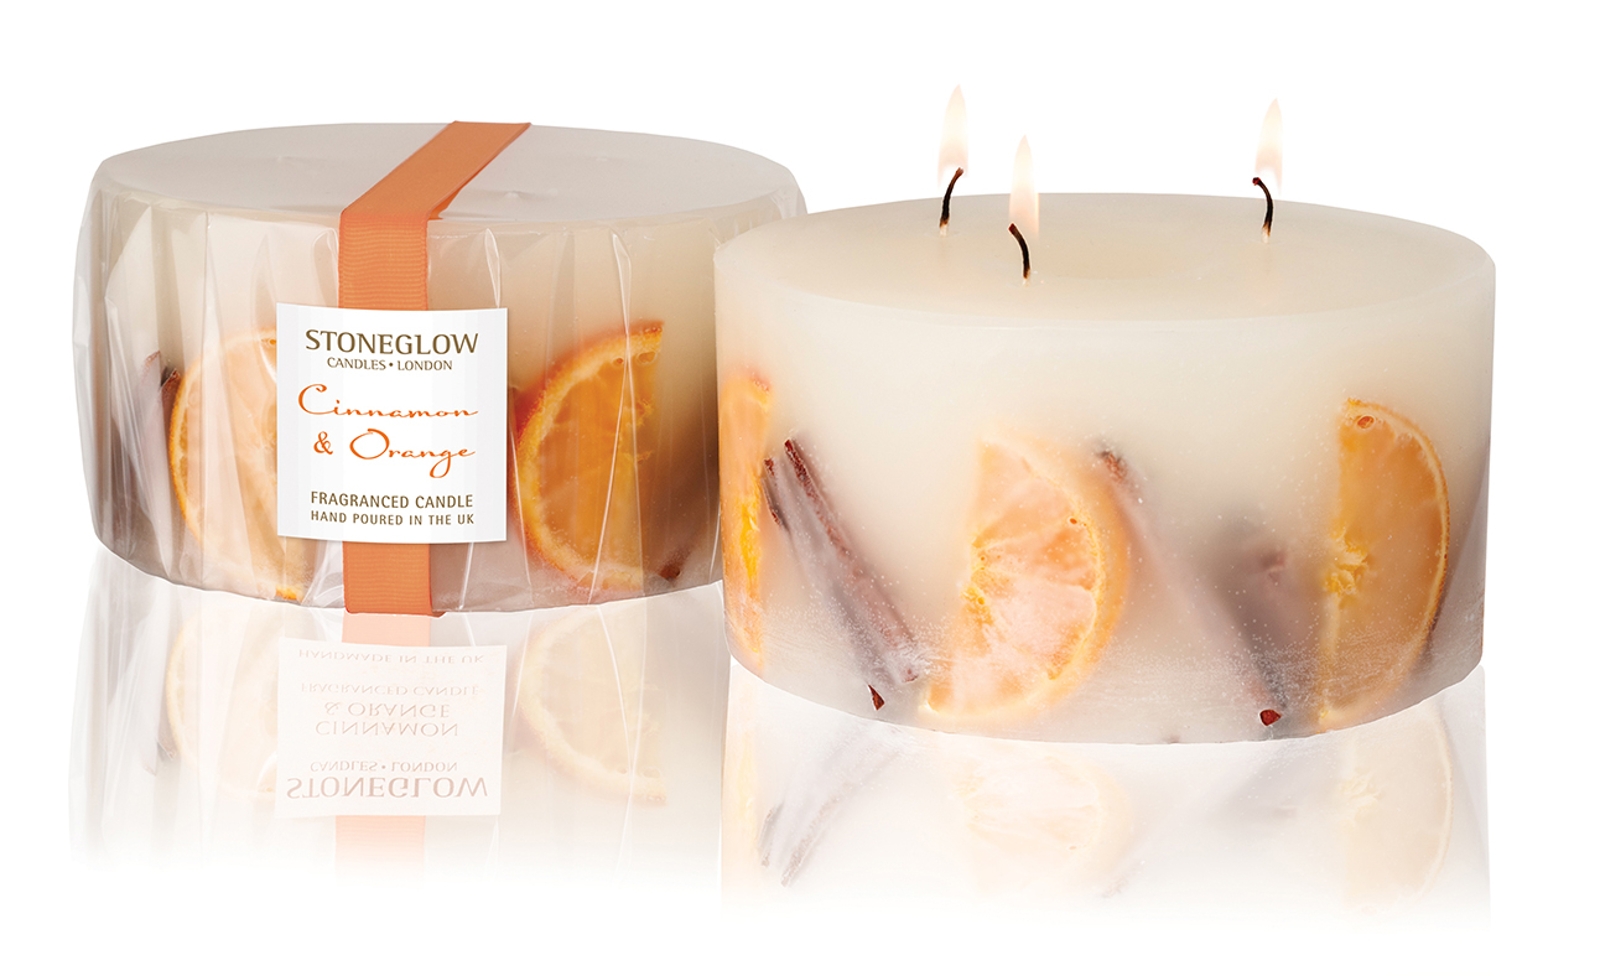 Stoneglow Candles Scented Cinnamon & Orange 3-Wick Candle BRAND NEW 